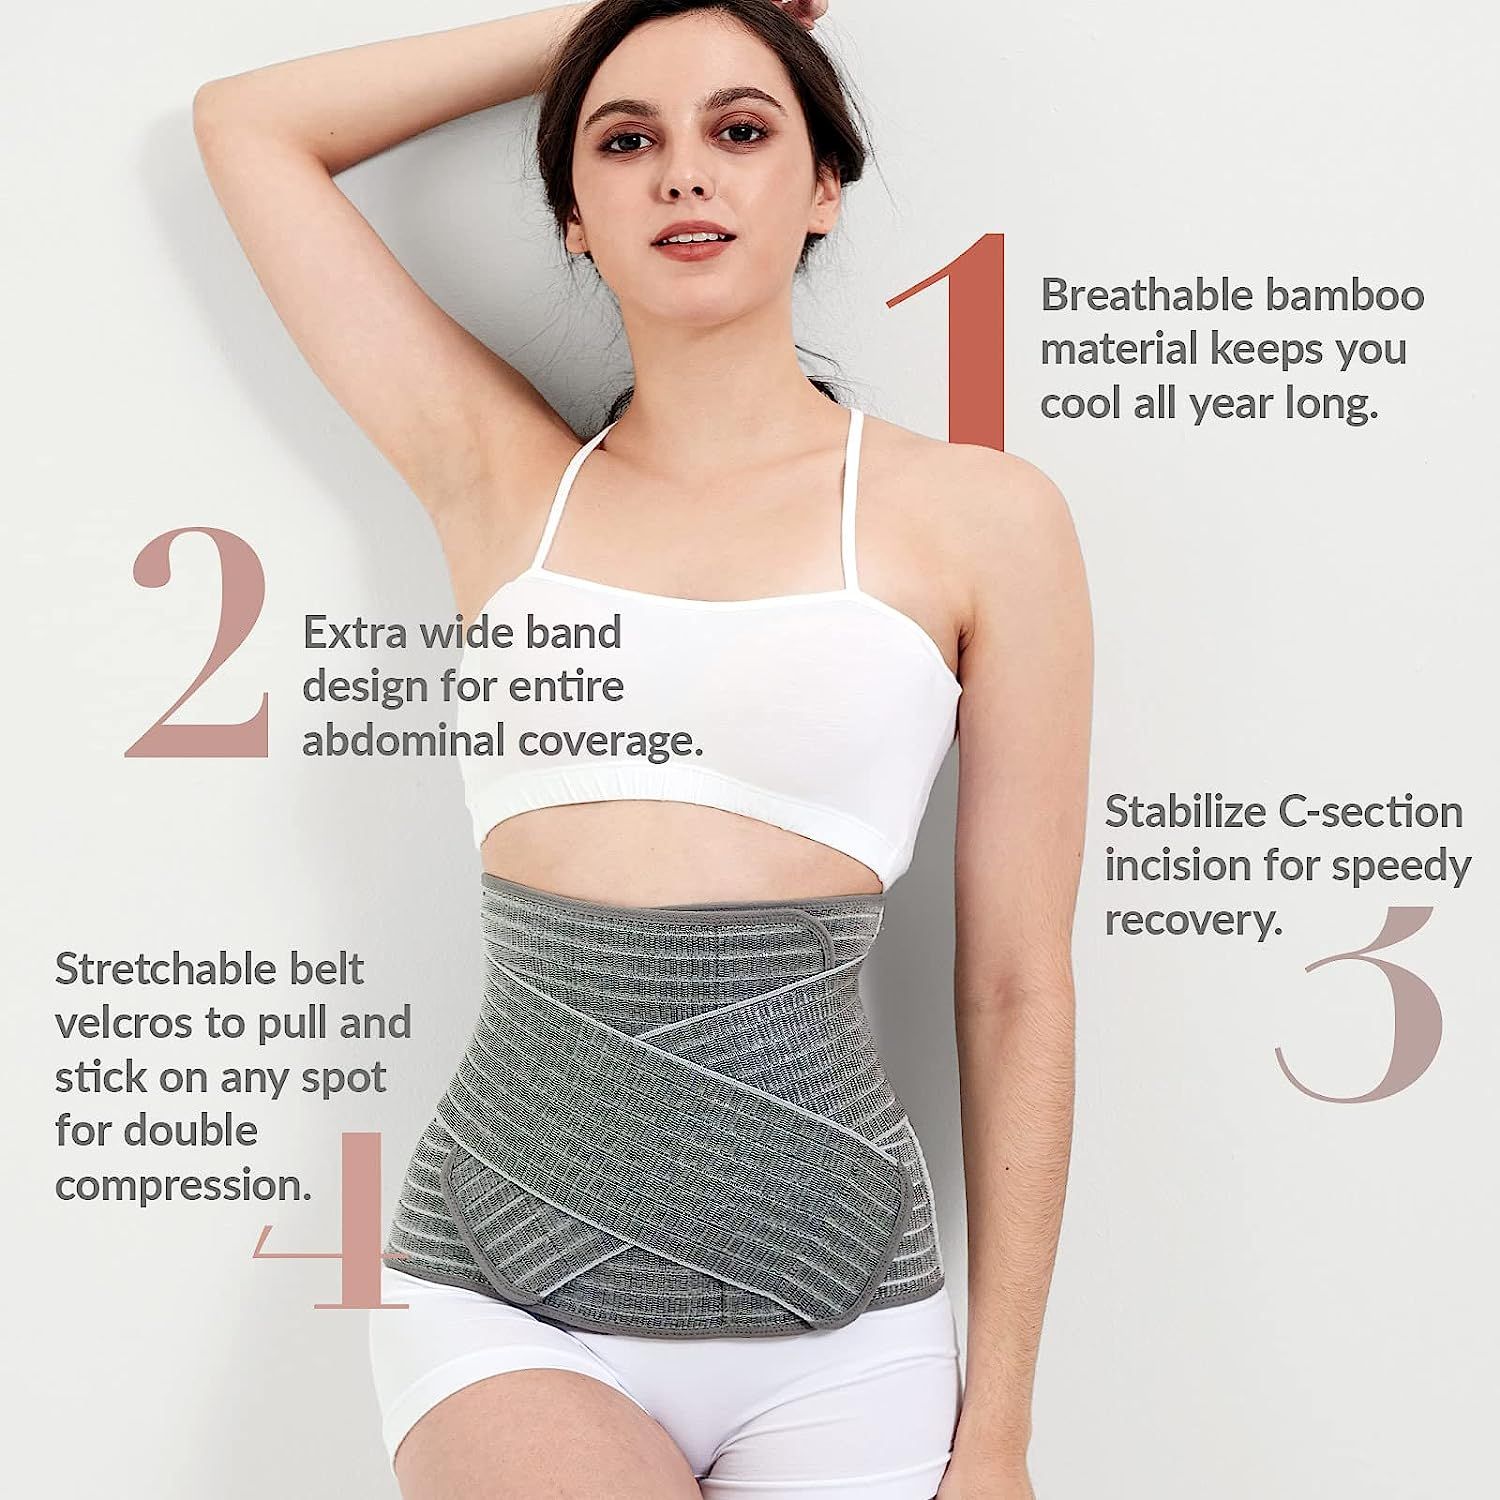 Special Girdle for Cesarean Cotton Belly Band Waist Belt for Pregnant Women